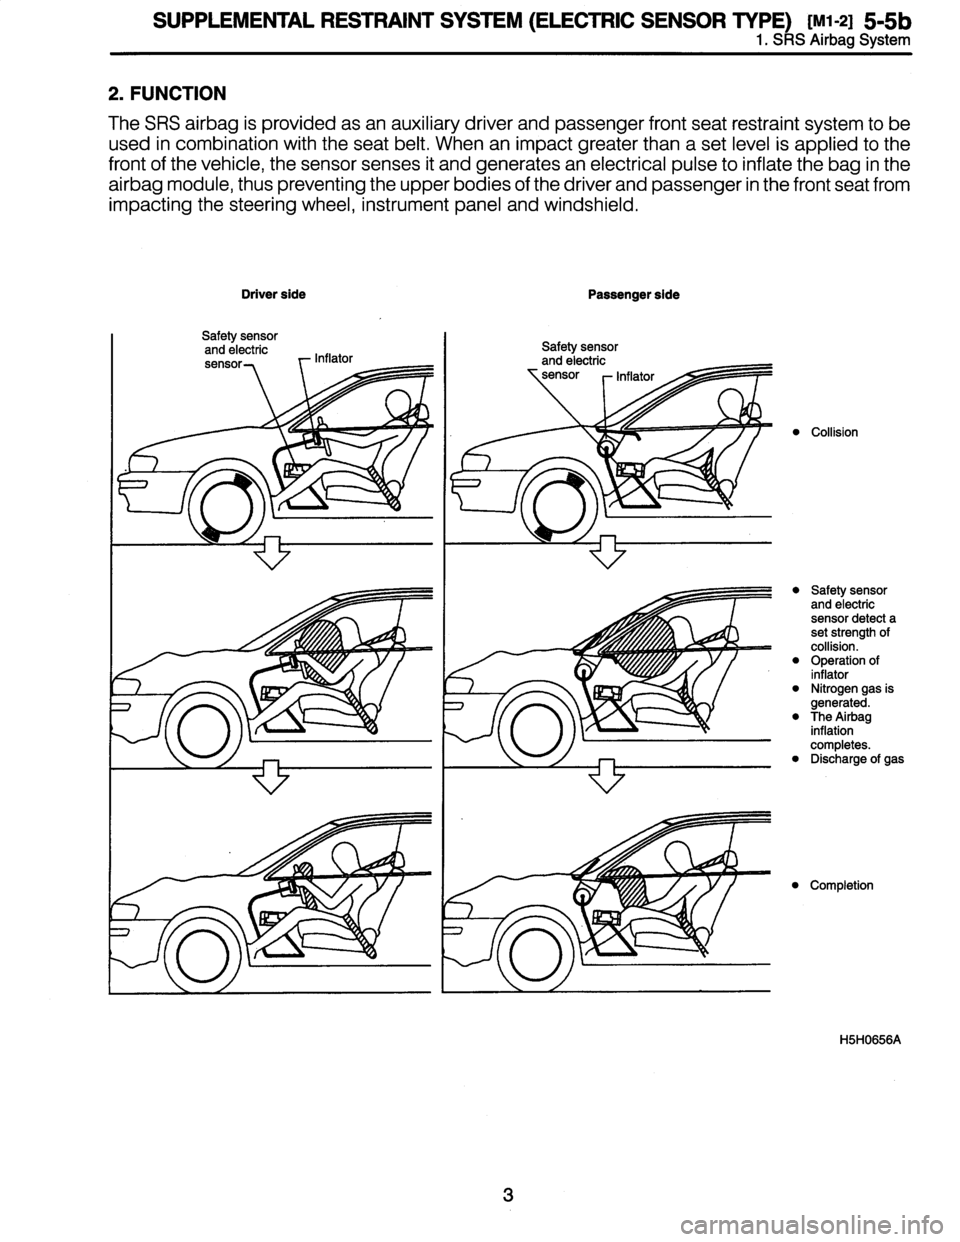 SUBARU LEGACY 1996  Service Repair Manual 
SUPPLEMENTAL
RESTRAINT
SYSTEM
(ELECTRIC
SENSOR
TYPE)
[Ml-2I
5-5b
1
.
SRS
Airbag
System

2
.
FUNCTION

The
SRS
airbag
is
provided
asan
auxiliary
driver
and
passenger
front
seat
restraint
system
to
be
